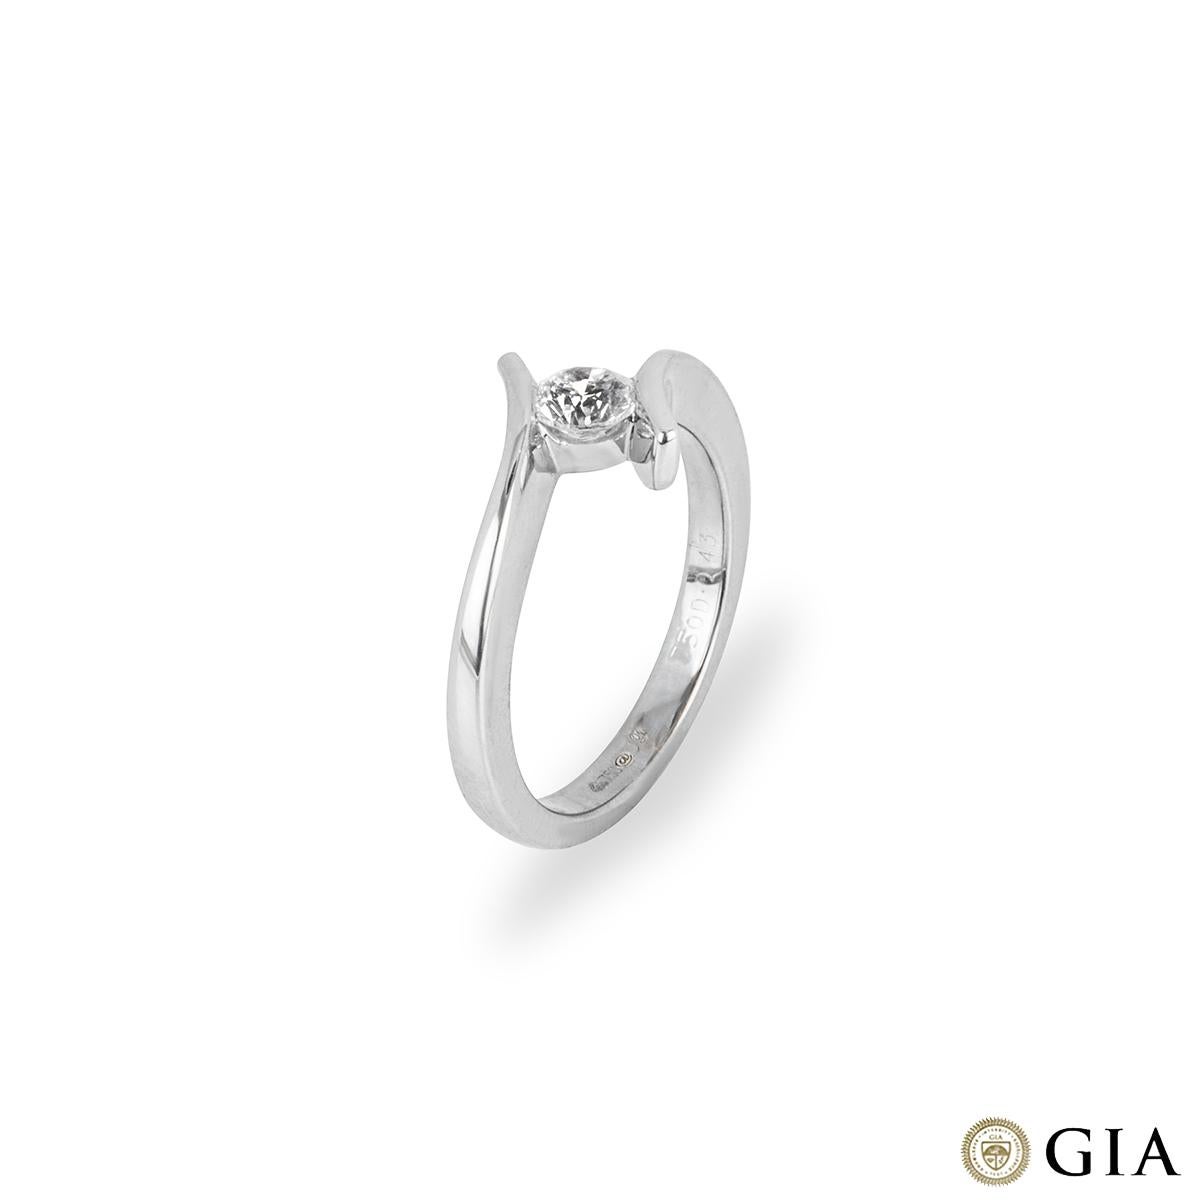 An elegant 18k white gold diamond single stone ring. The ring features a modern twist design holding the diamond into place in a channel setting. The round brilliant cut diamond weighs 0.43ct, is F colour and VS1 in clarity. The ring measures